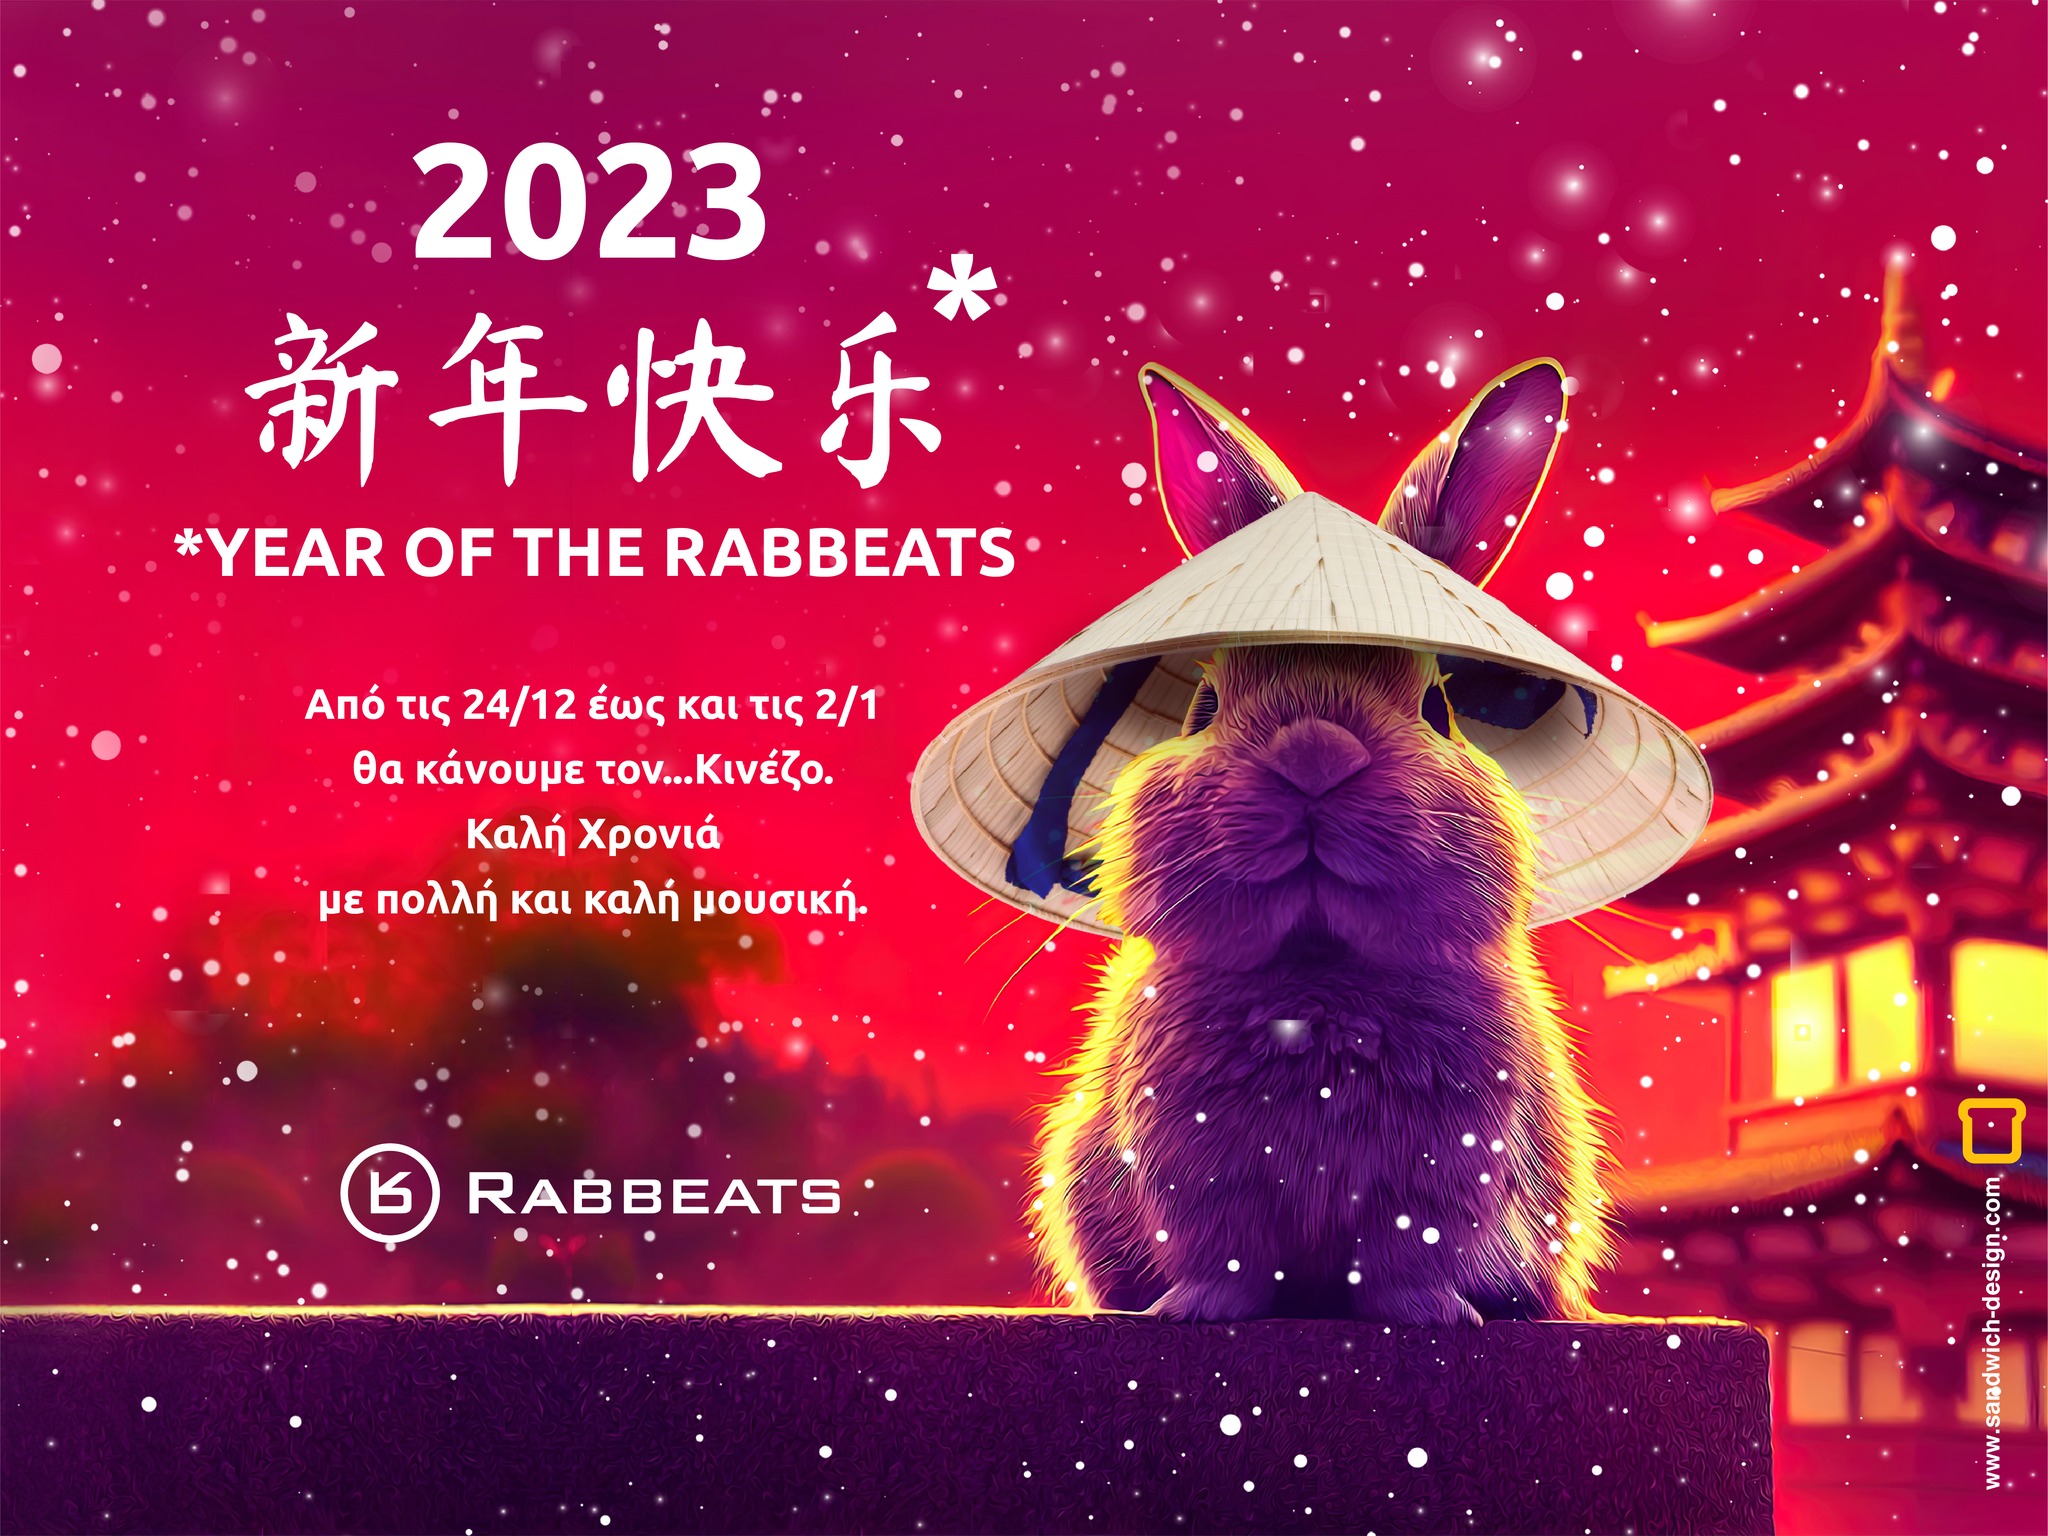 An Interview with Stratos Diamantis, the co-founder of Rabbeats